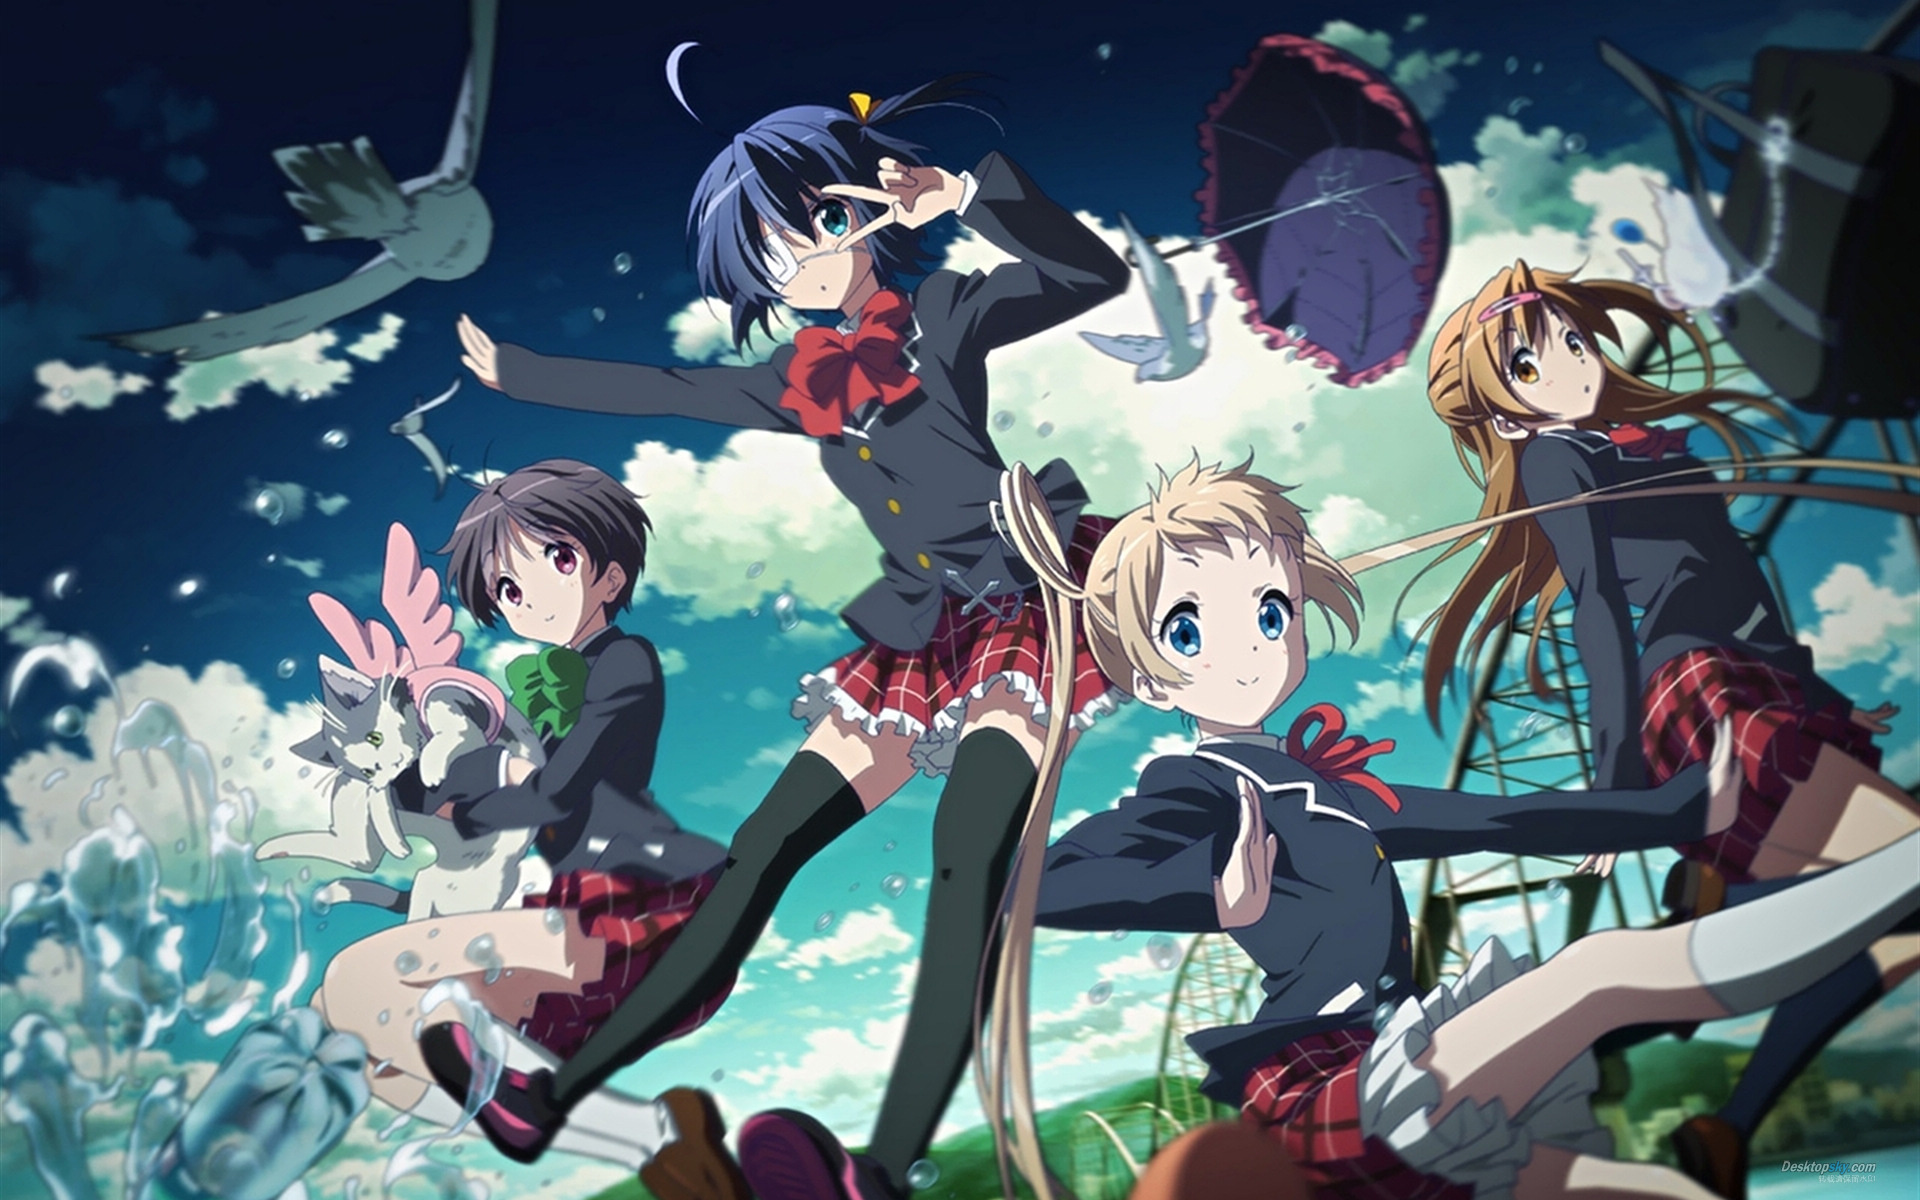 Love, Chunibyo and Other Delusions, Anime series, Vibrant wallpapers, Fantasy romance, 1920x1200 HD Desktop